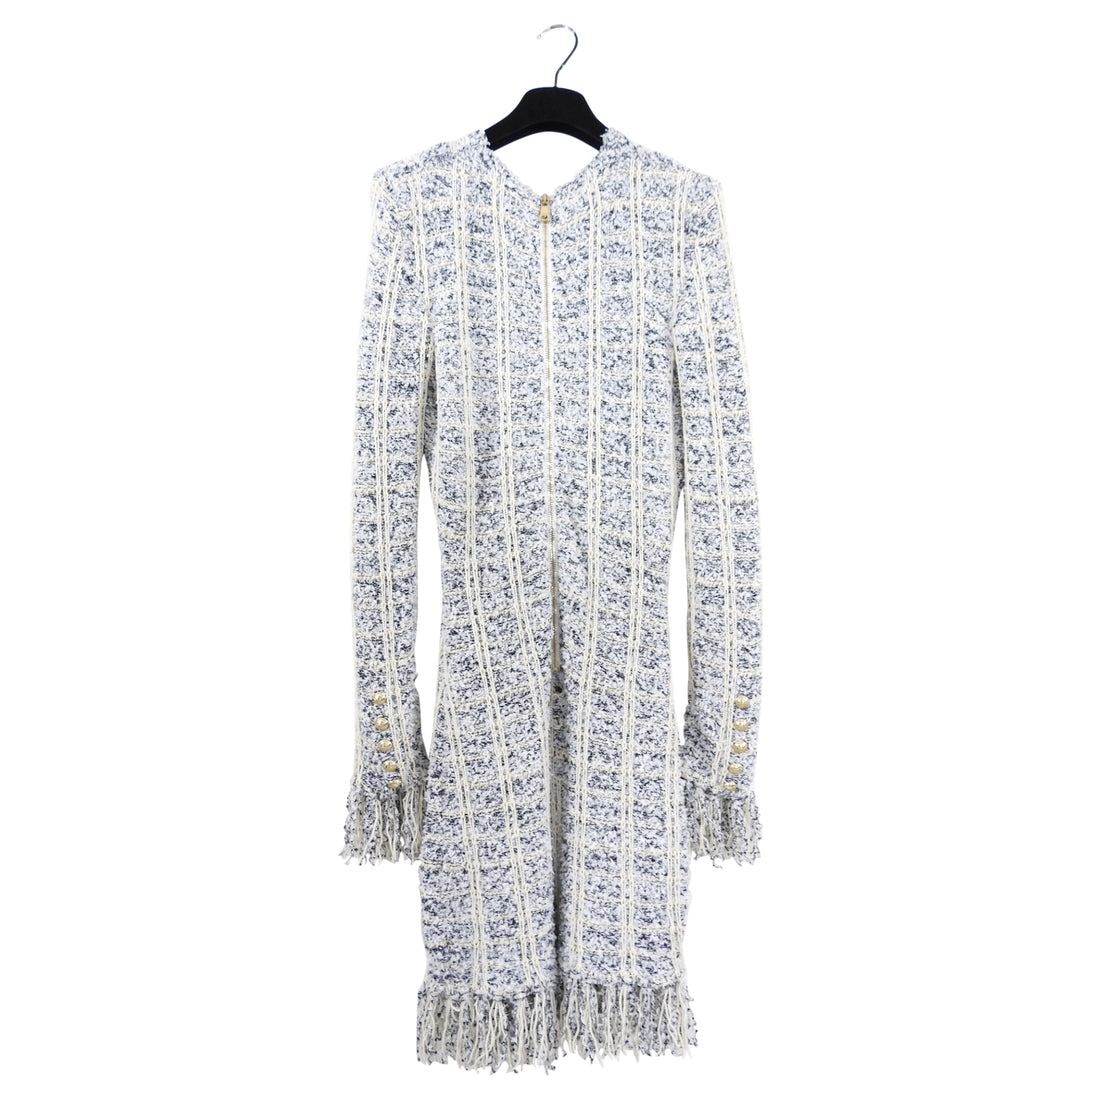 Balmain Ivory White Black Fringe Knit Tweed Dress with Gold Buttons - 6